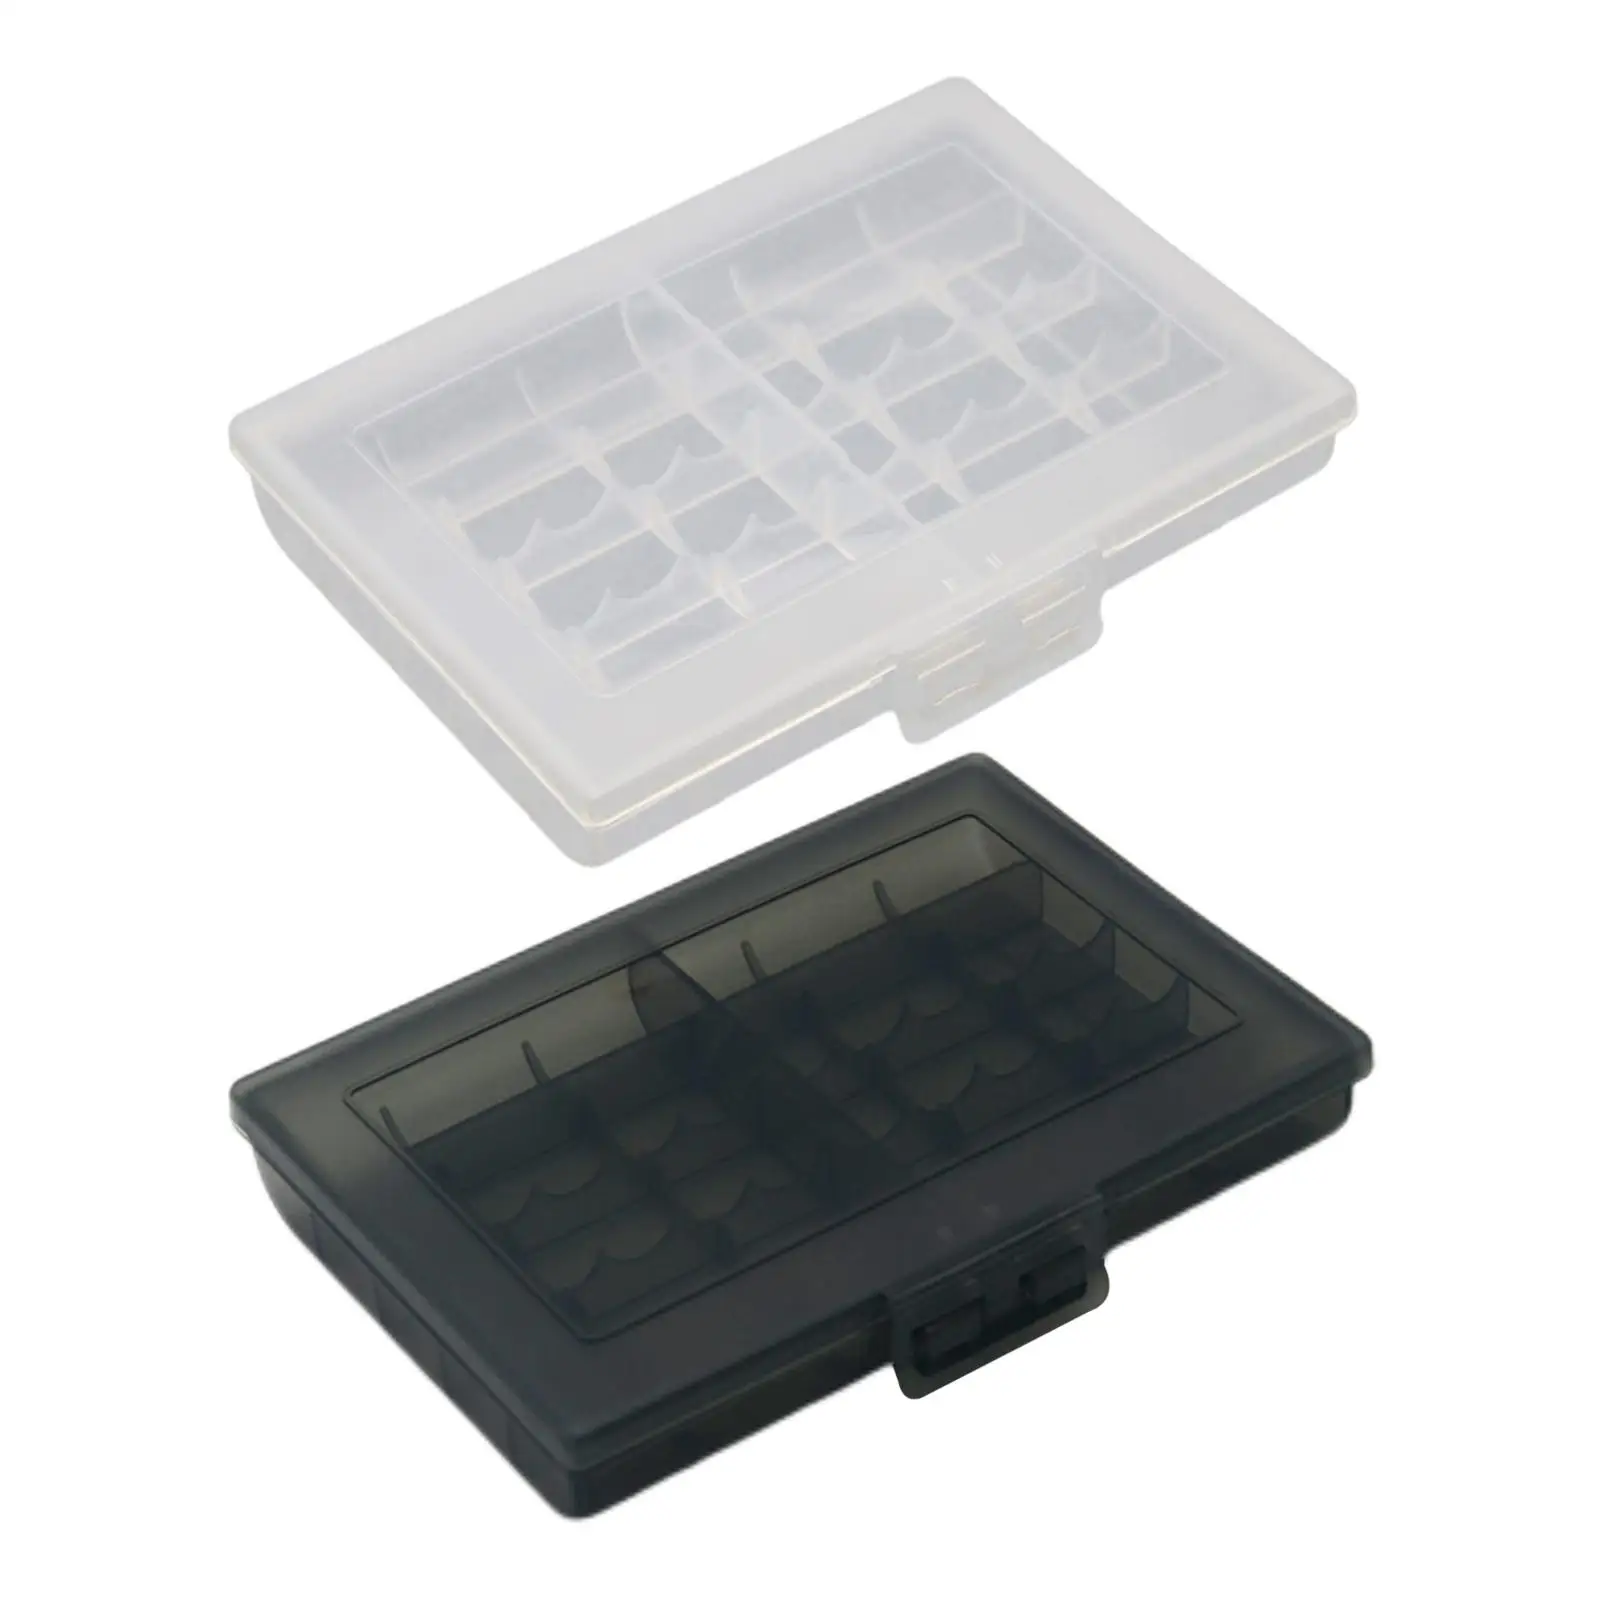 Battery Storage Case Holds 10 AA/AAA Batteries Portable Durable Anti Collision Practical Holder Box Protective Container